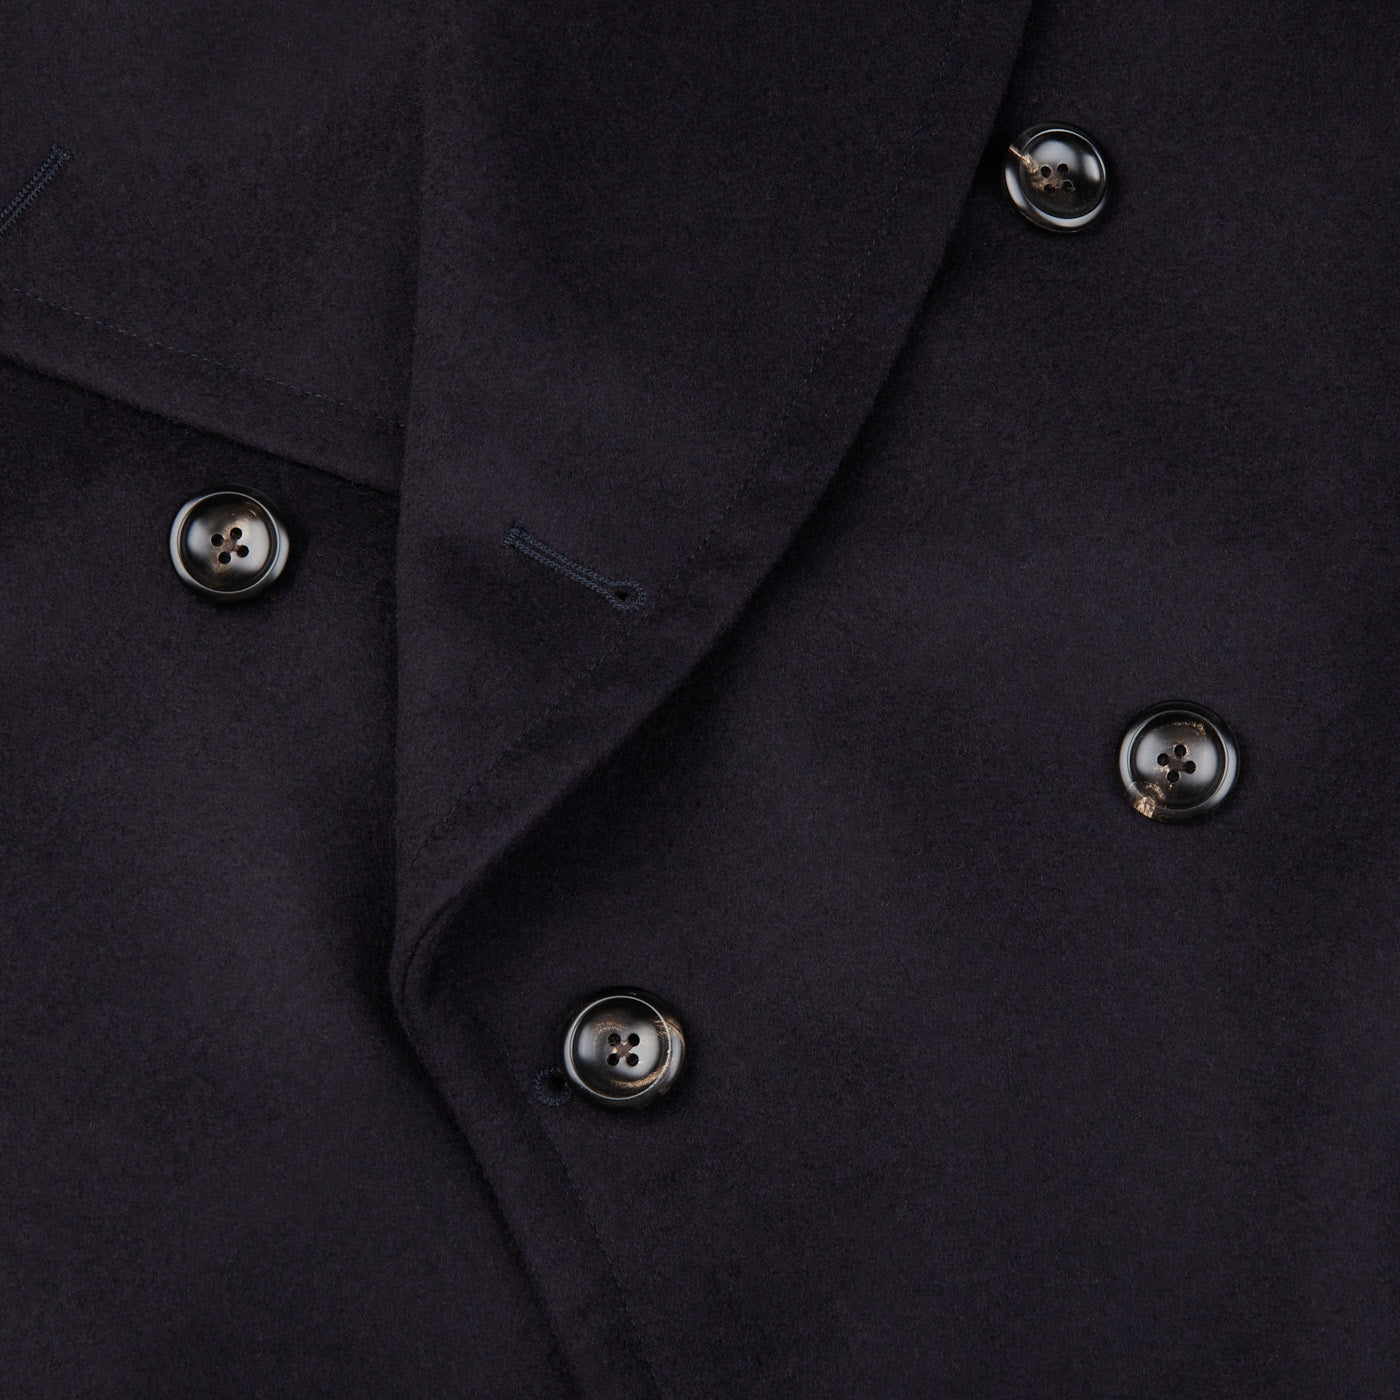 A close up image of a Luigi Bianchi navy blue double-breasted jacket with buttons.